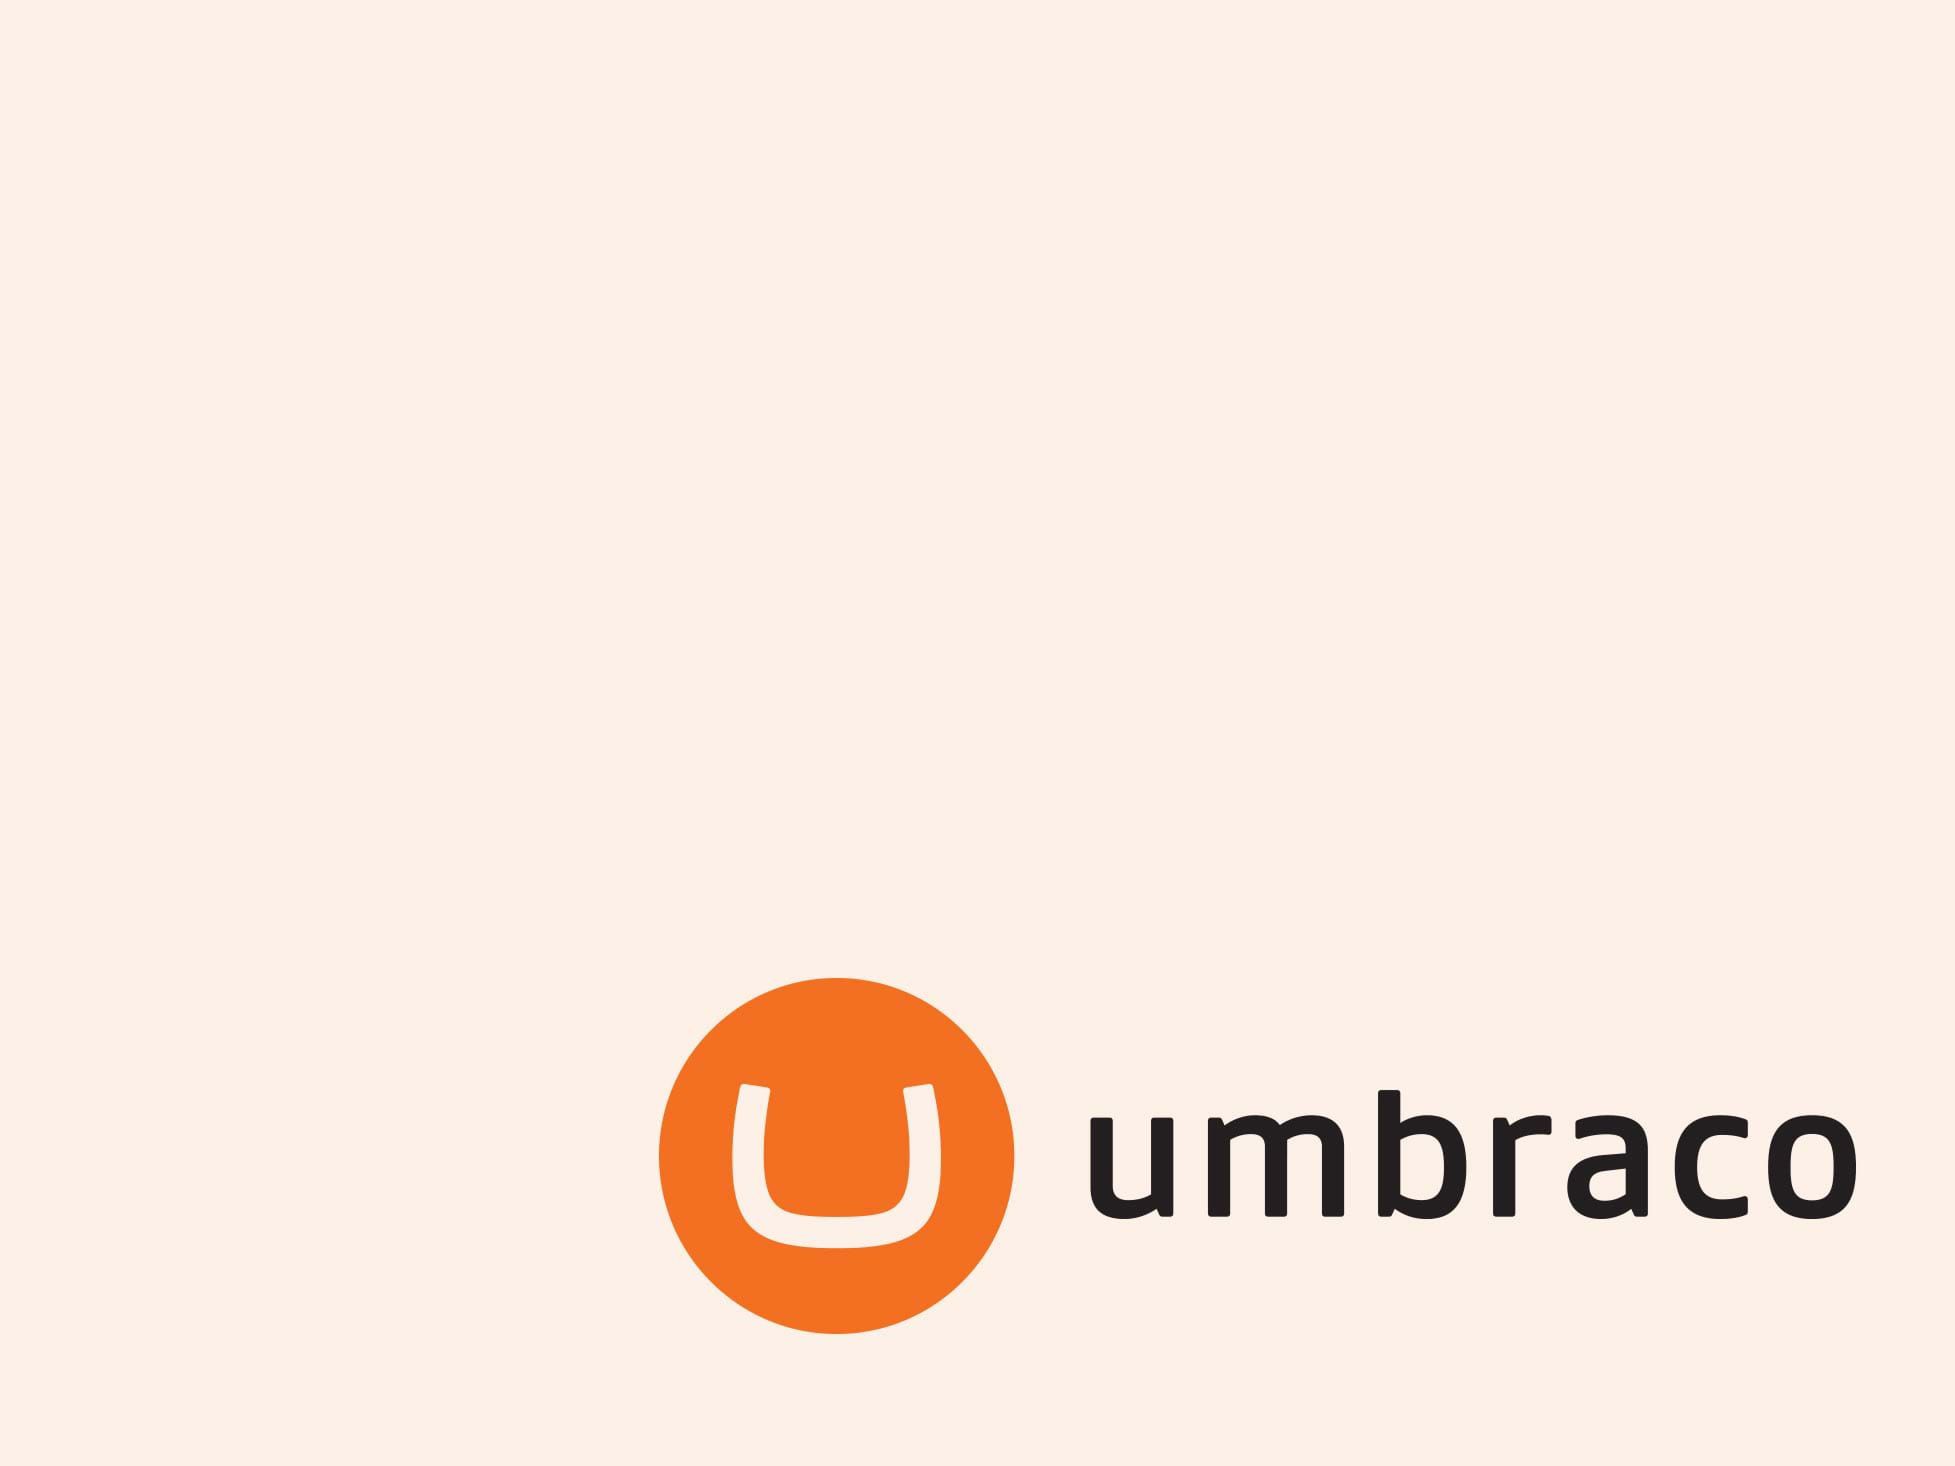 migrating your website to umbraco